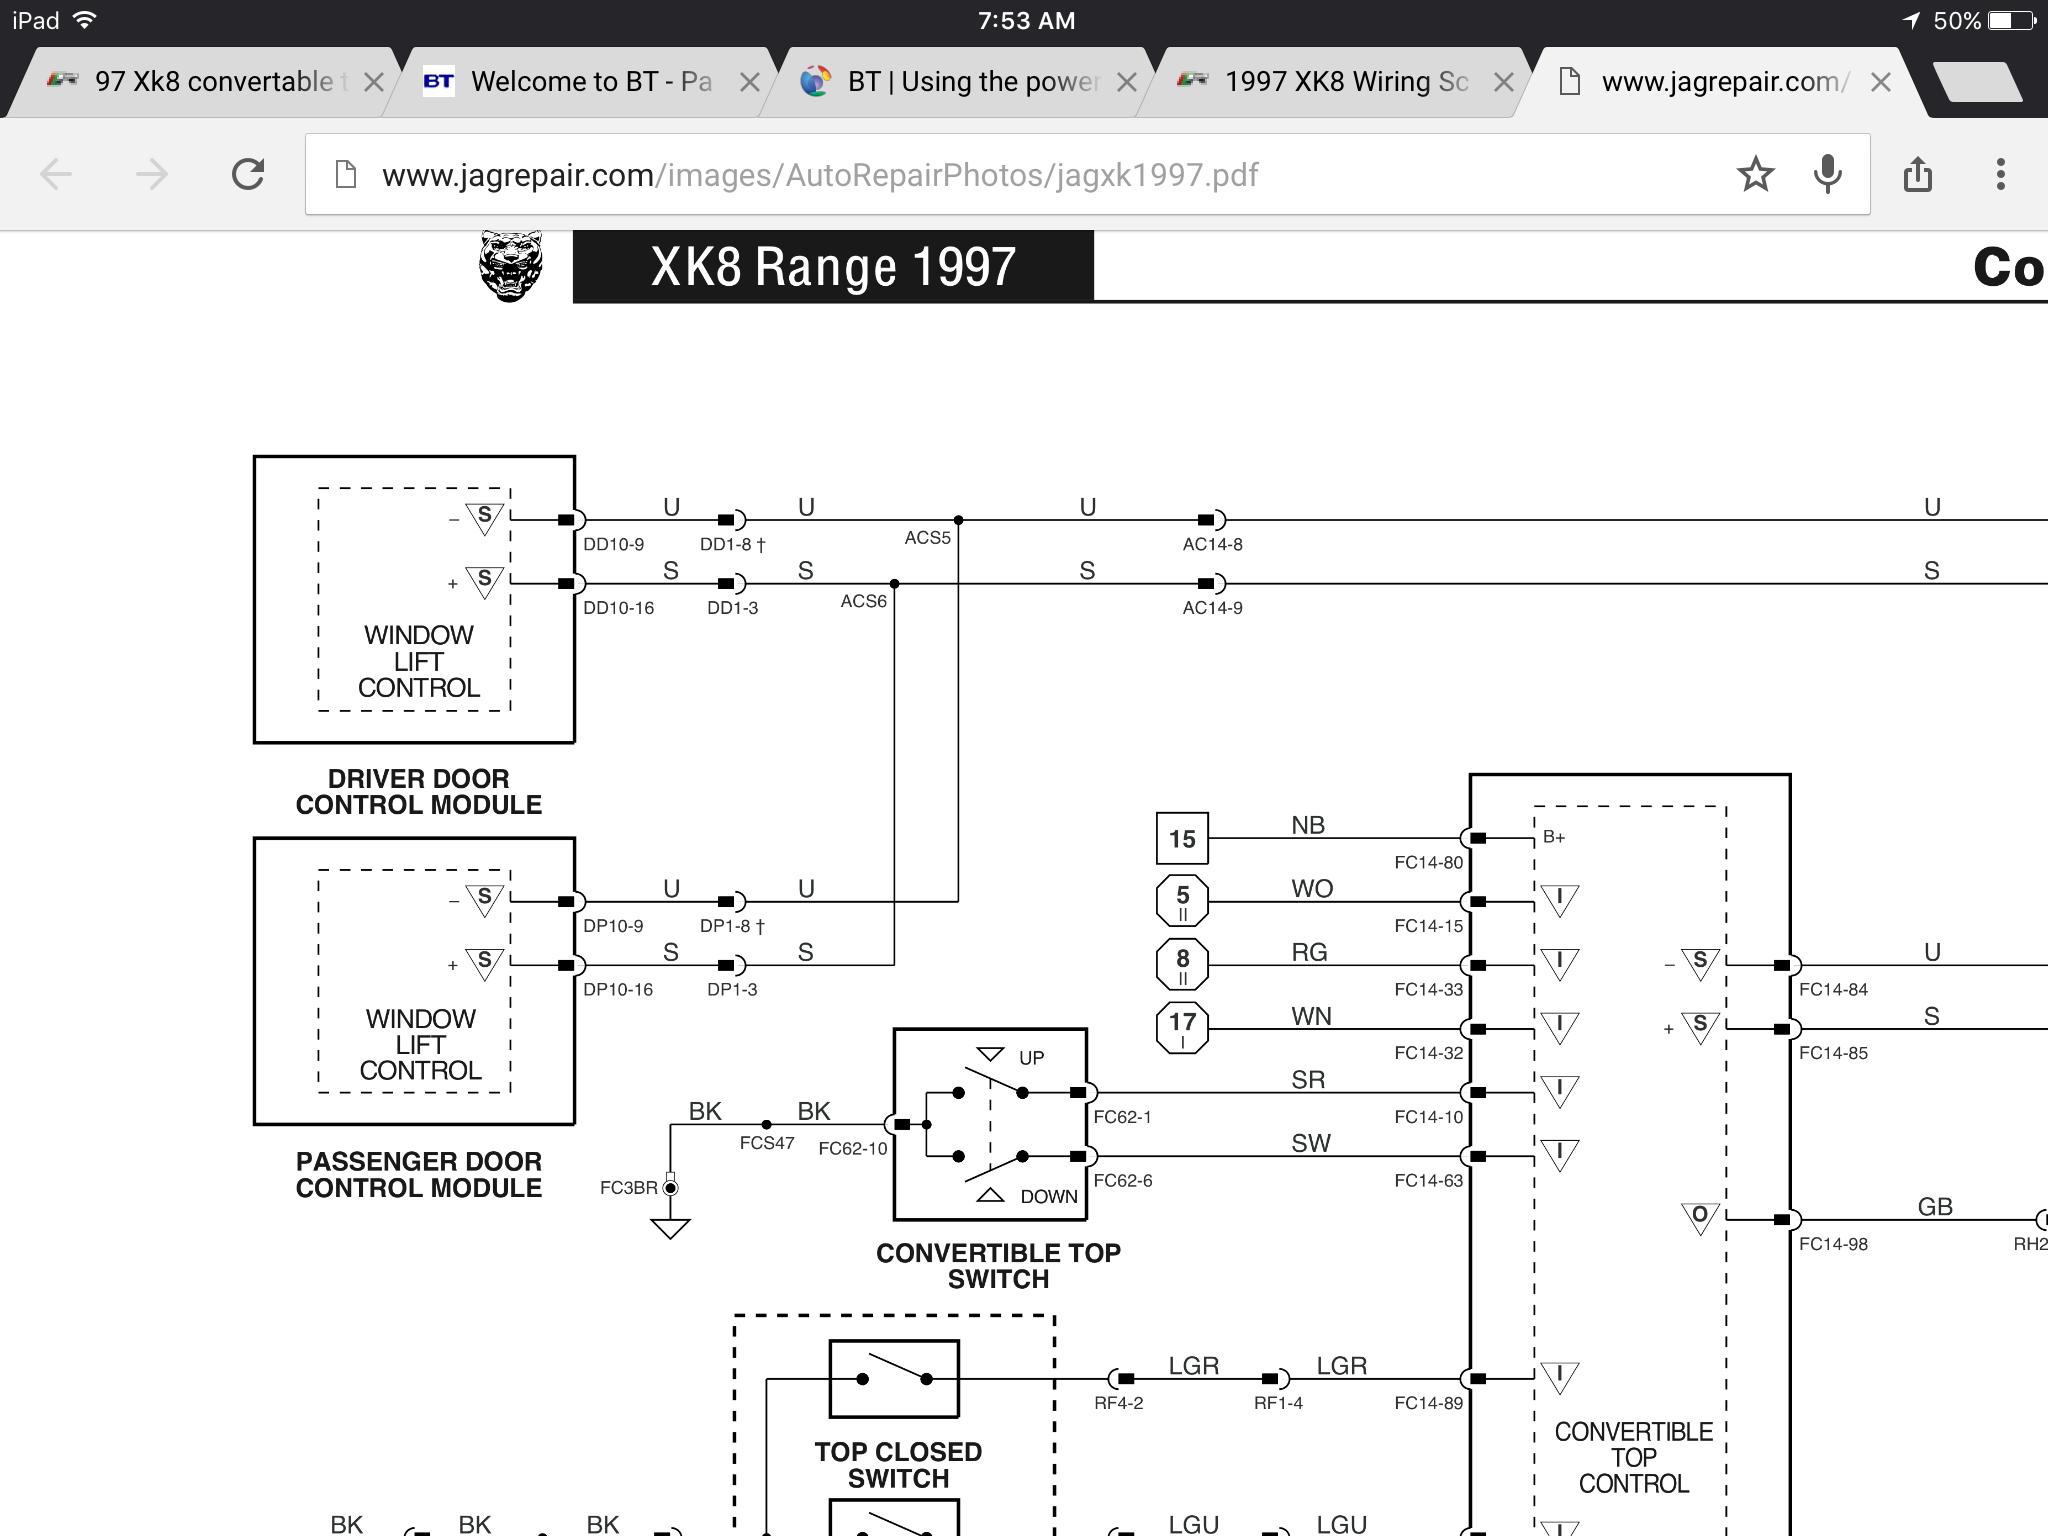 97 Xk8 convertable top switch wiring - Jaguar Forums ... how to wire a 3 way dimmer switch diagrams 